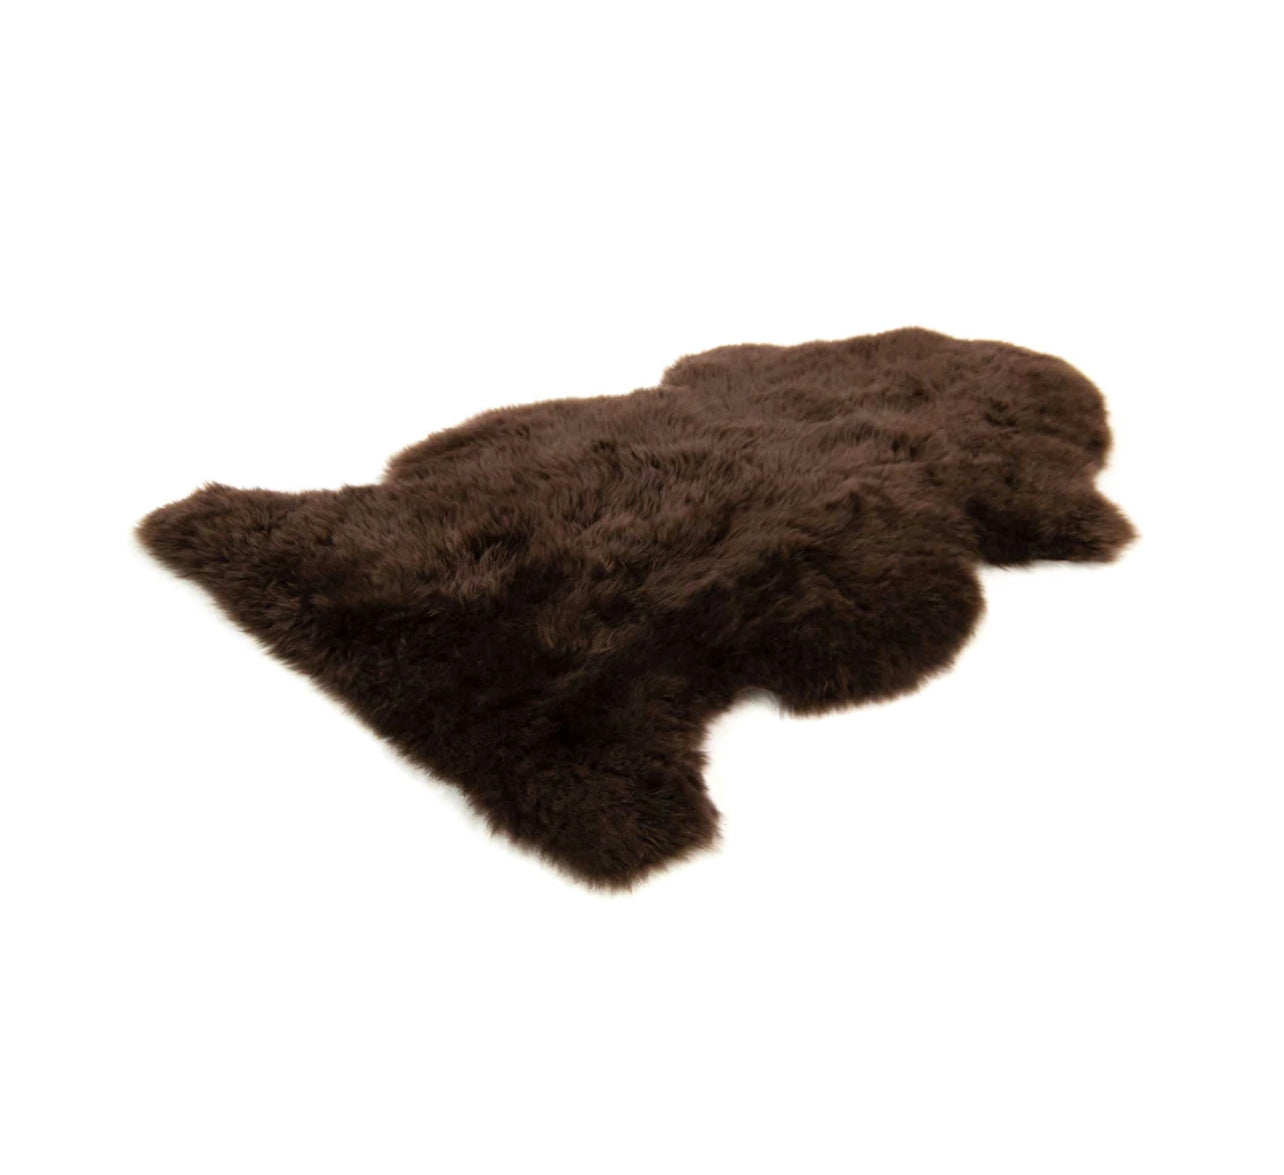 NZ Longwool Sheepskins Life of Riley Pet Products  The Life of Riley